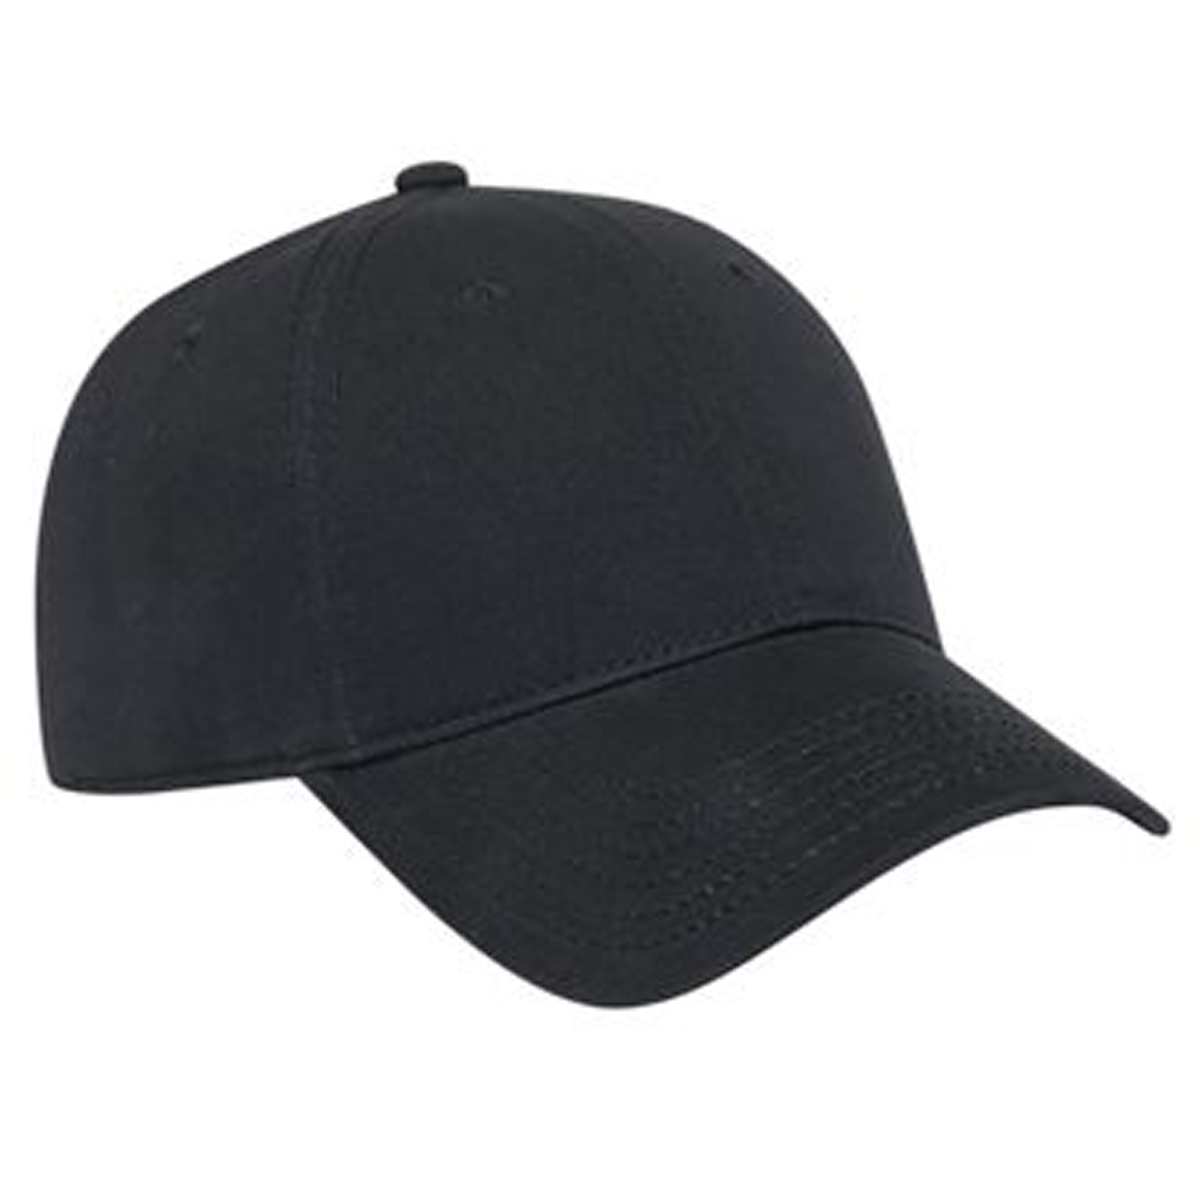 Otto Cap Ultra Soft Superior Brushed Cotton Twill Low Profile Style Caps - Hat / Cap for Summer, Sports, Picnic, Casual wear and Reunion etc - image 1 of 2